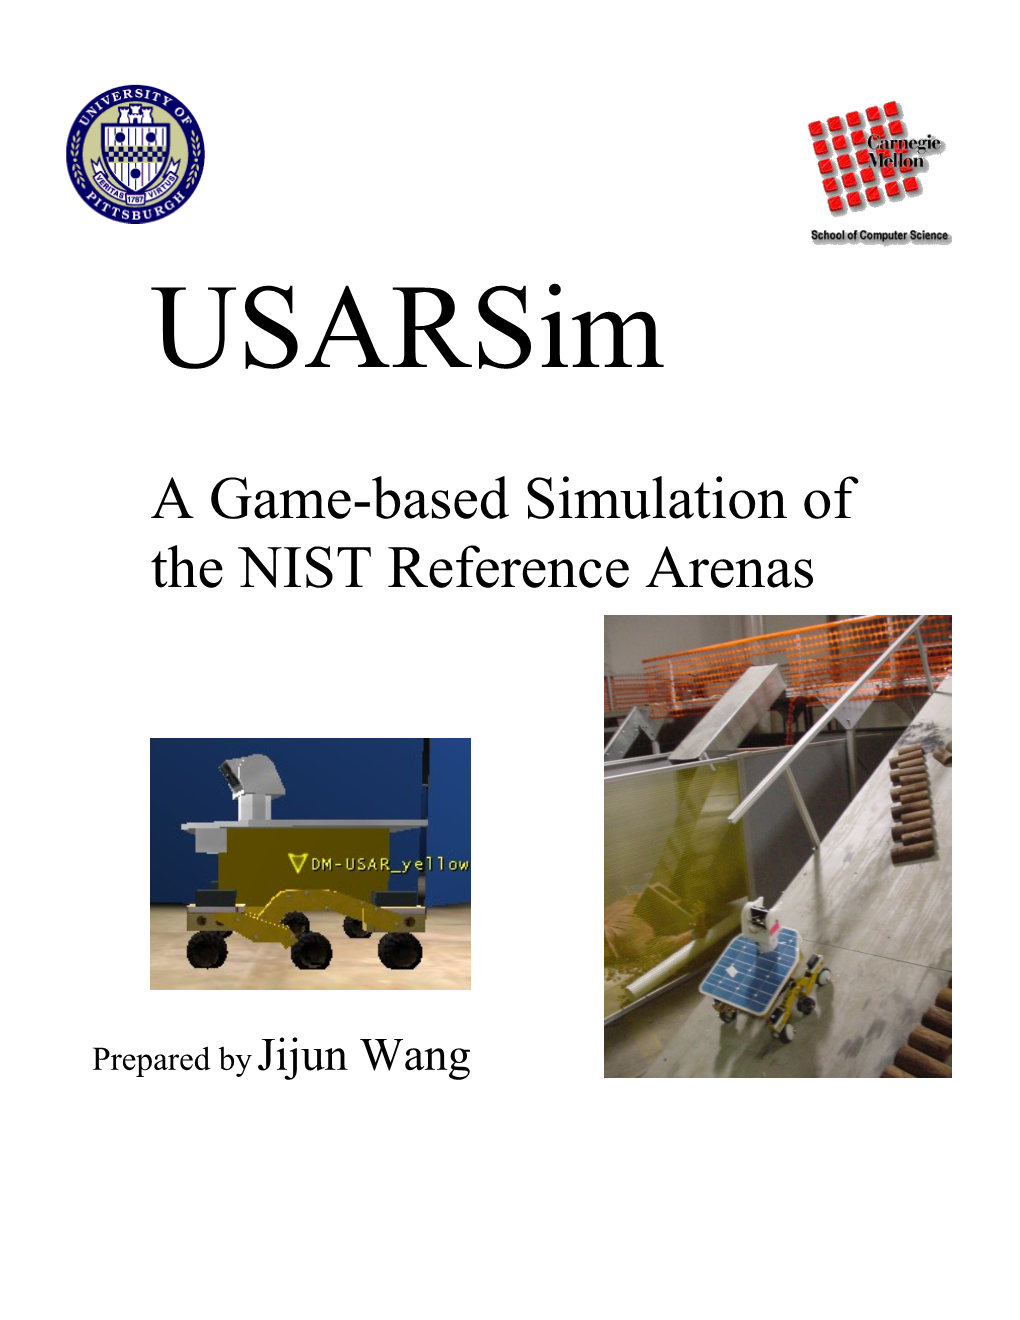 A Game-Based Simulation of the NIST Reference Arenas